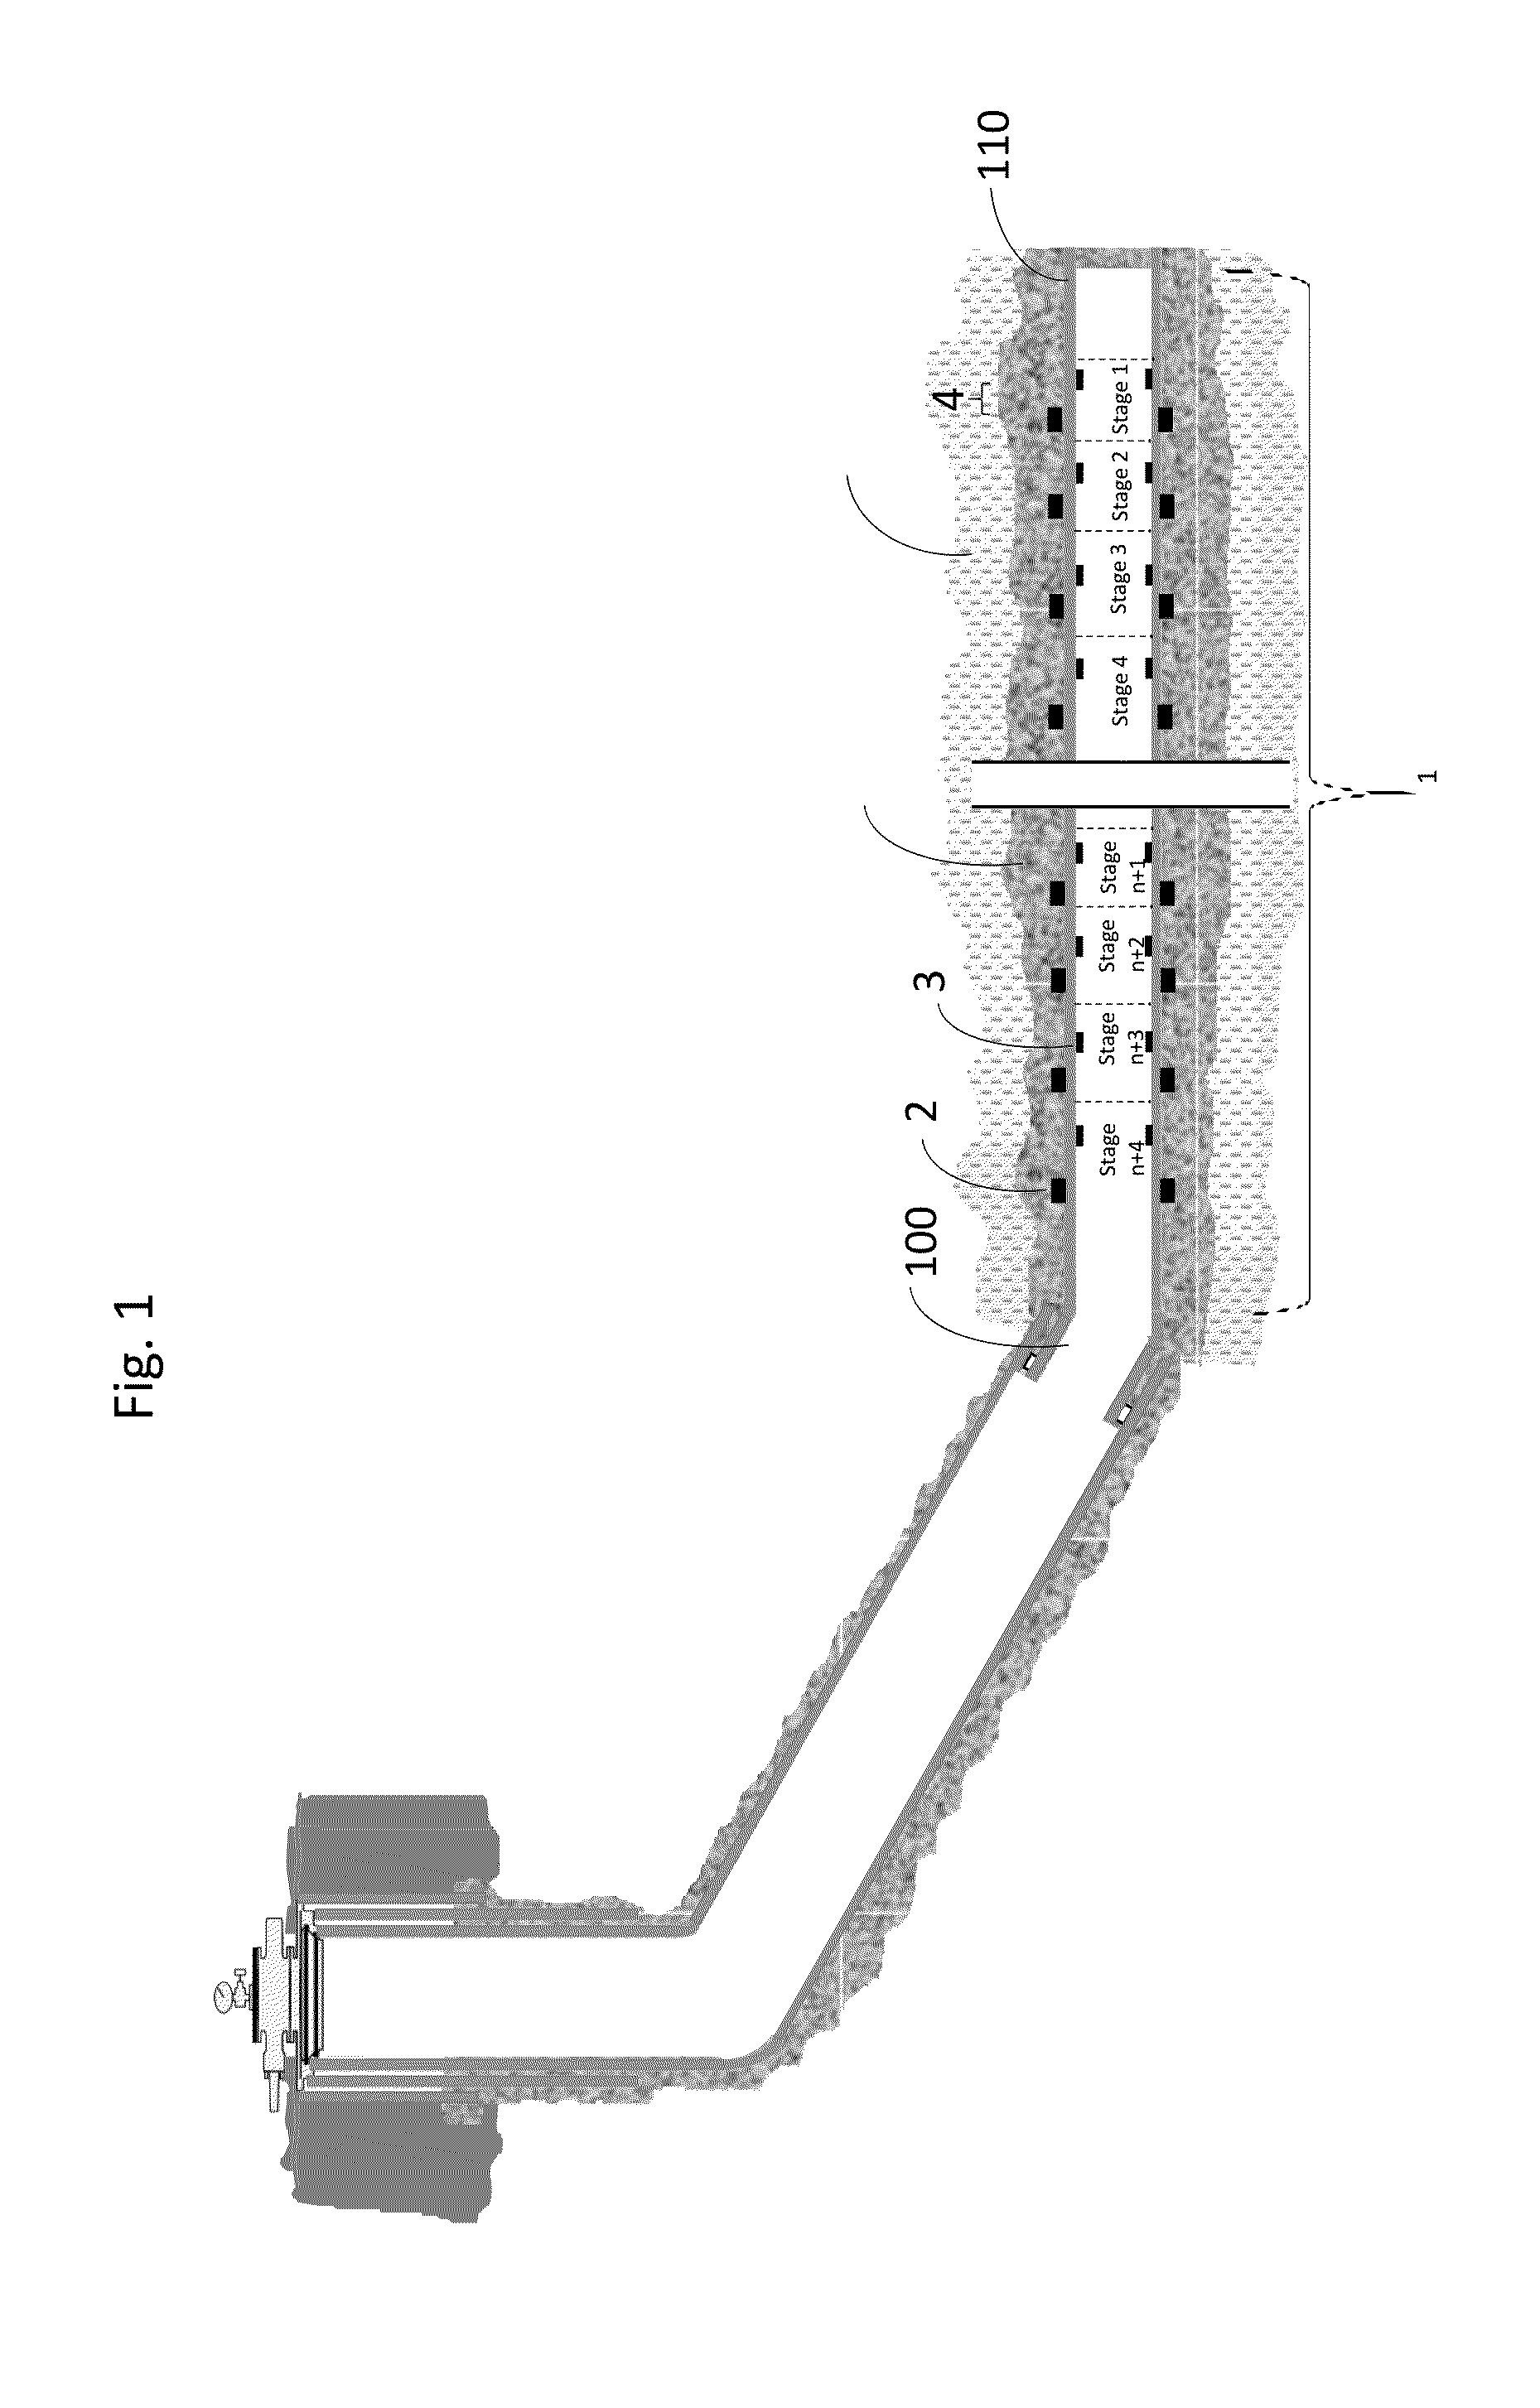 Single trip - through drill pipe proppant fracturing method for multiple cemented-in frac sleeves